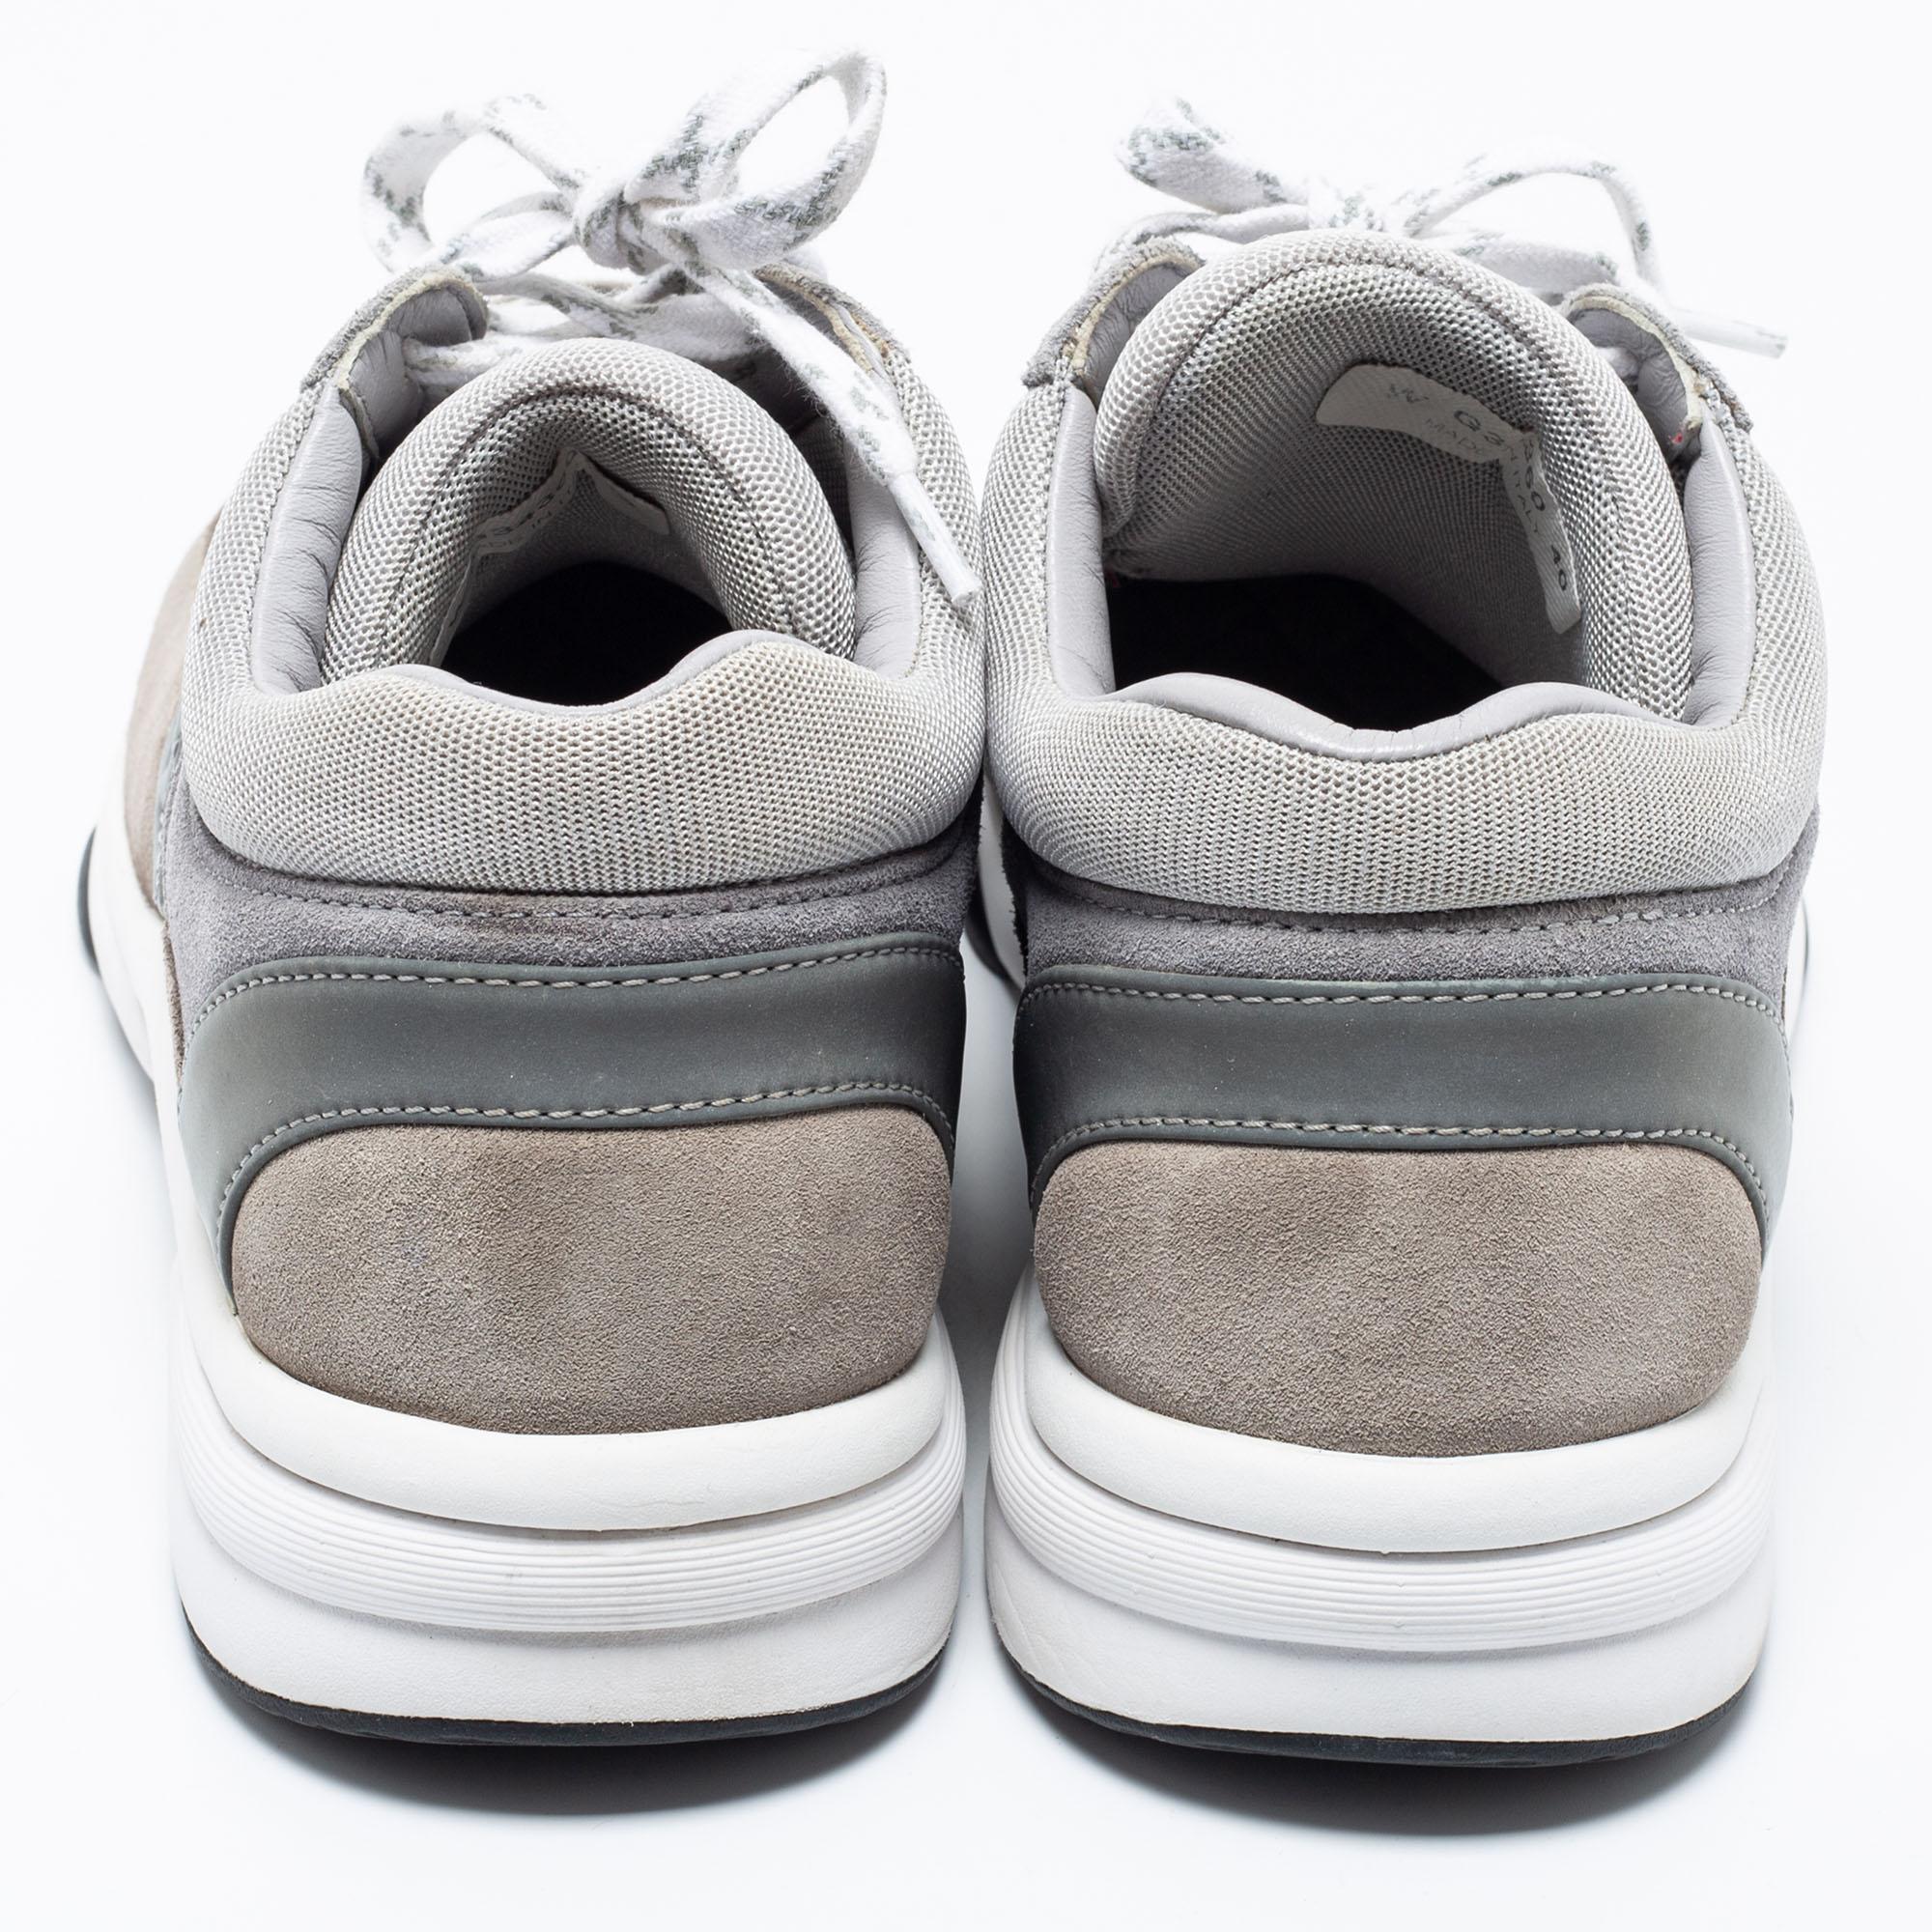 grey chanel sneakers